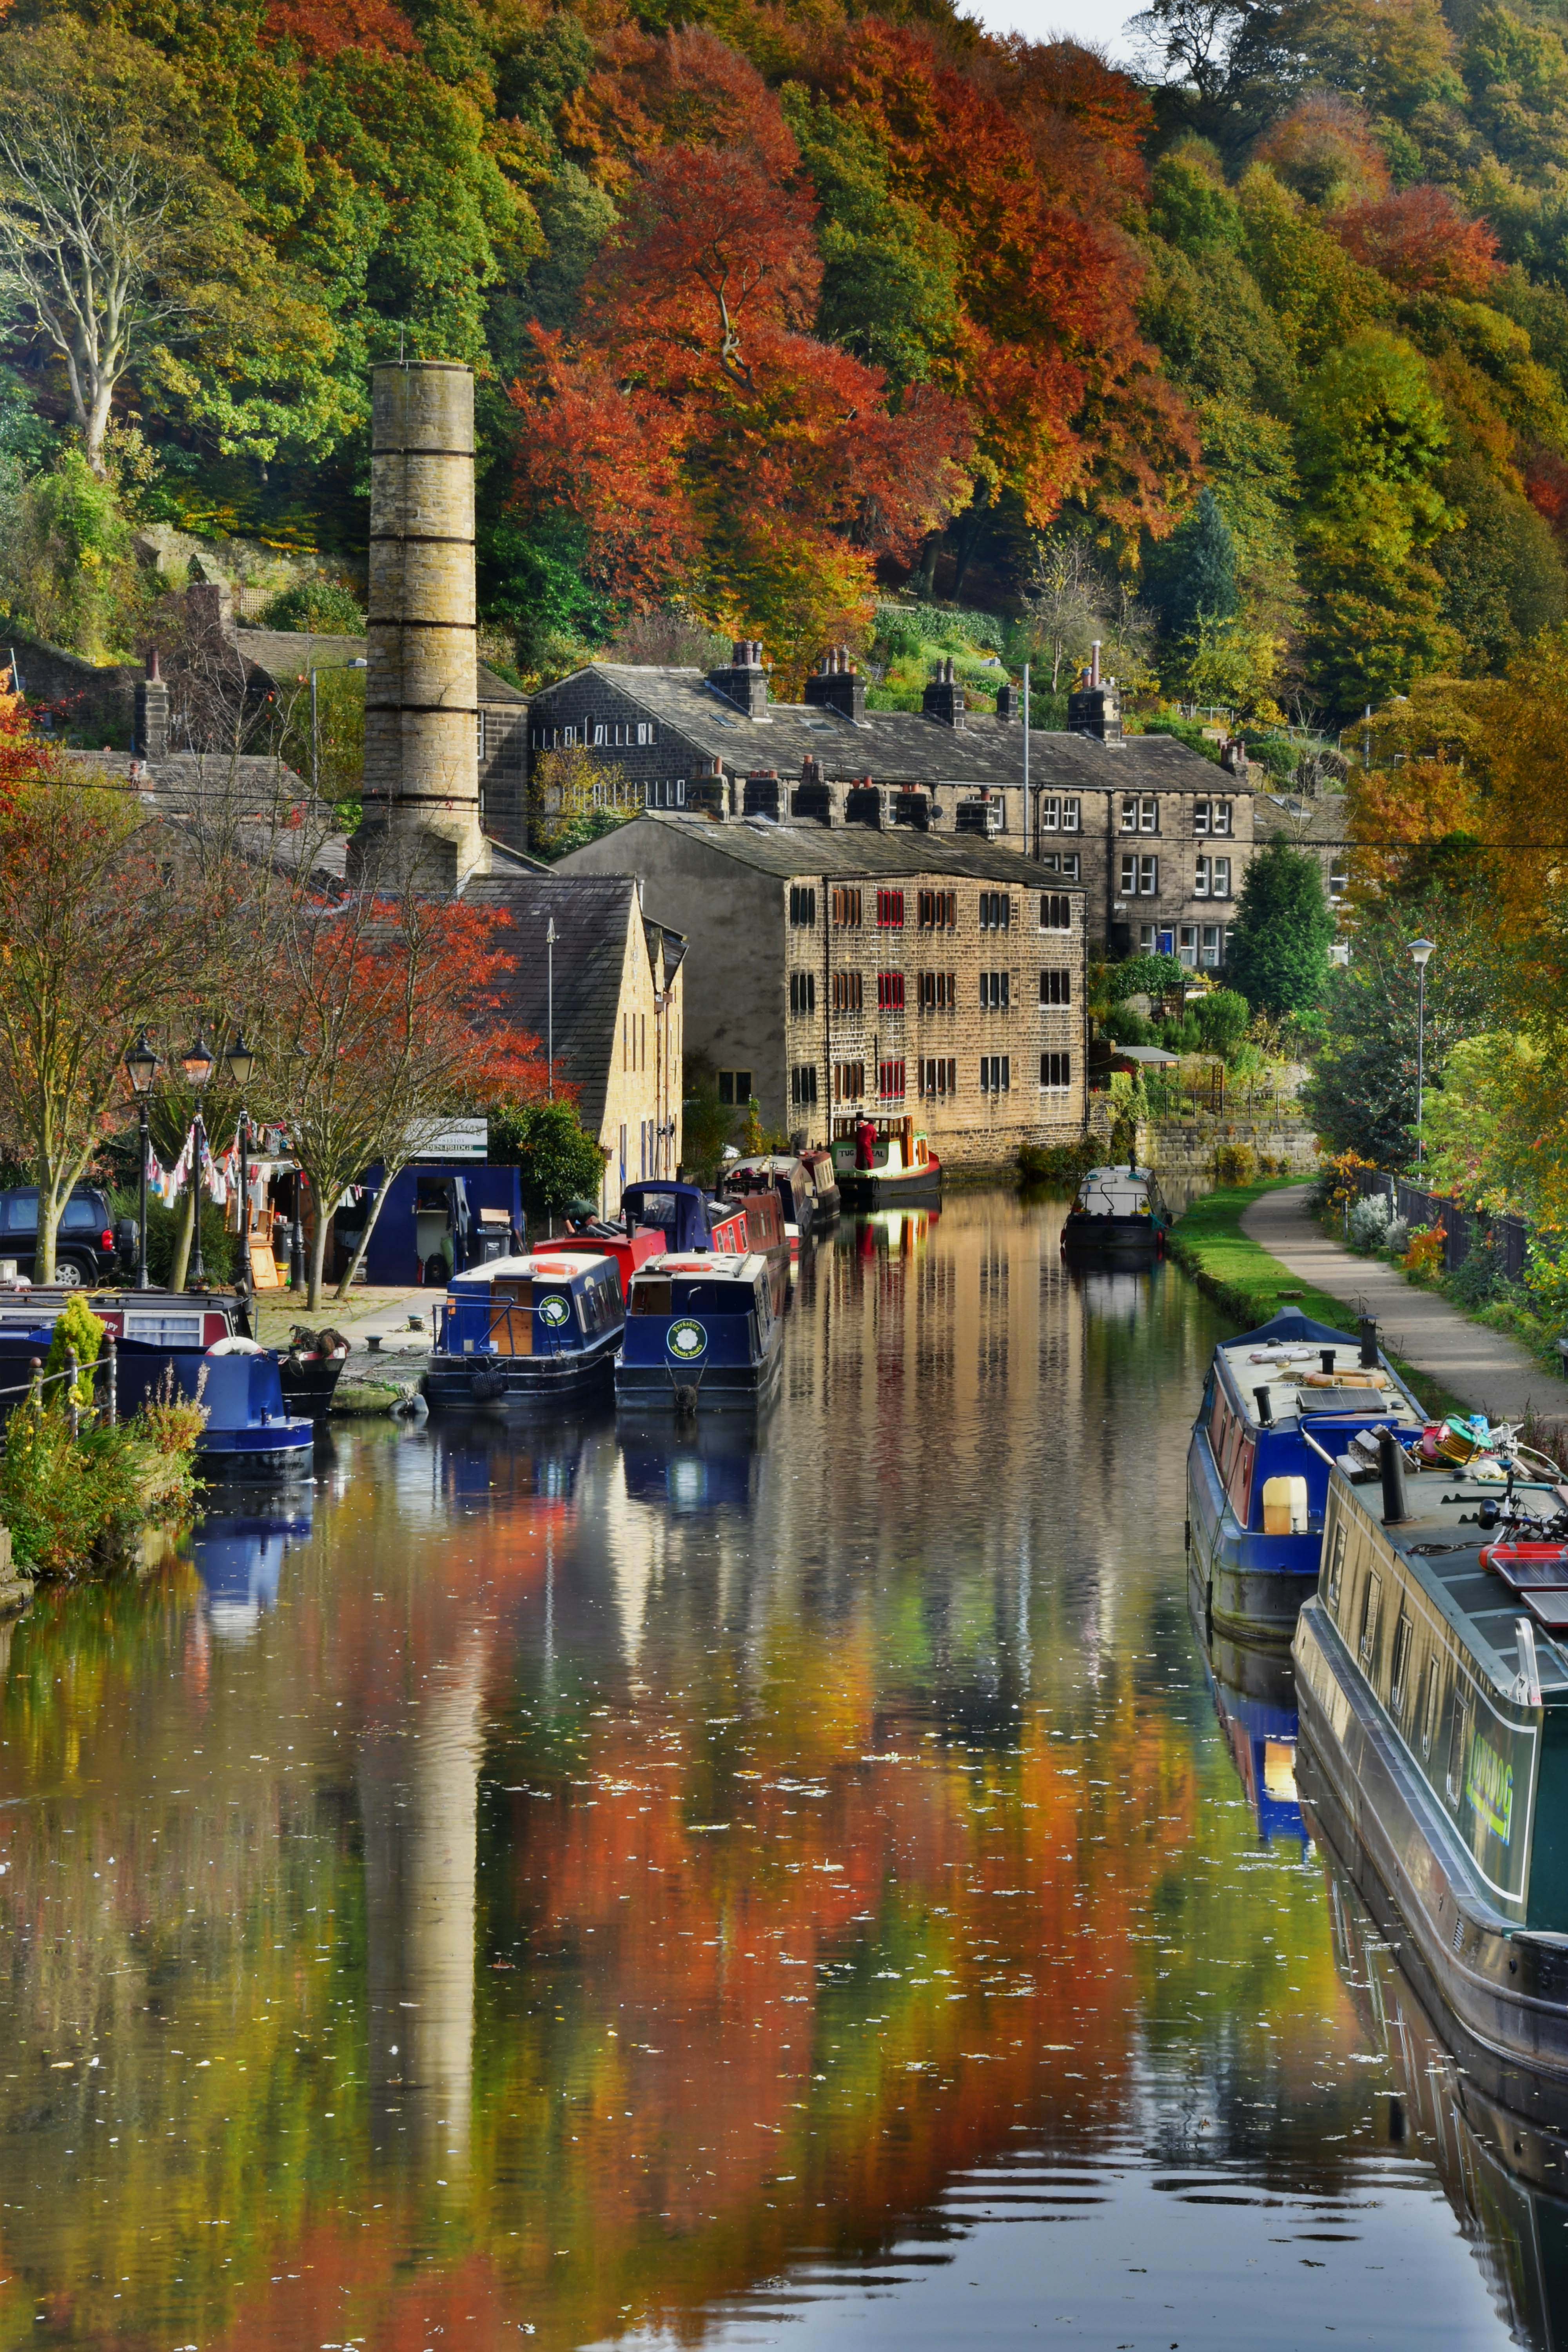 The canal at Hebden Bridge